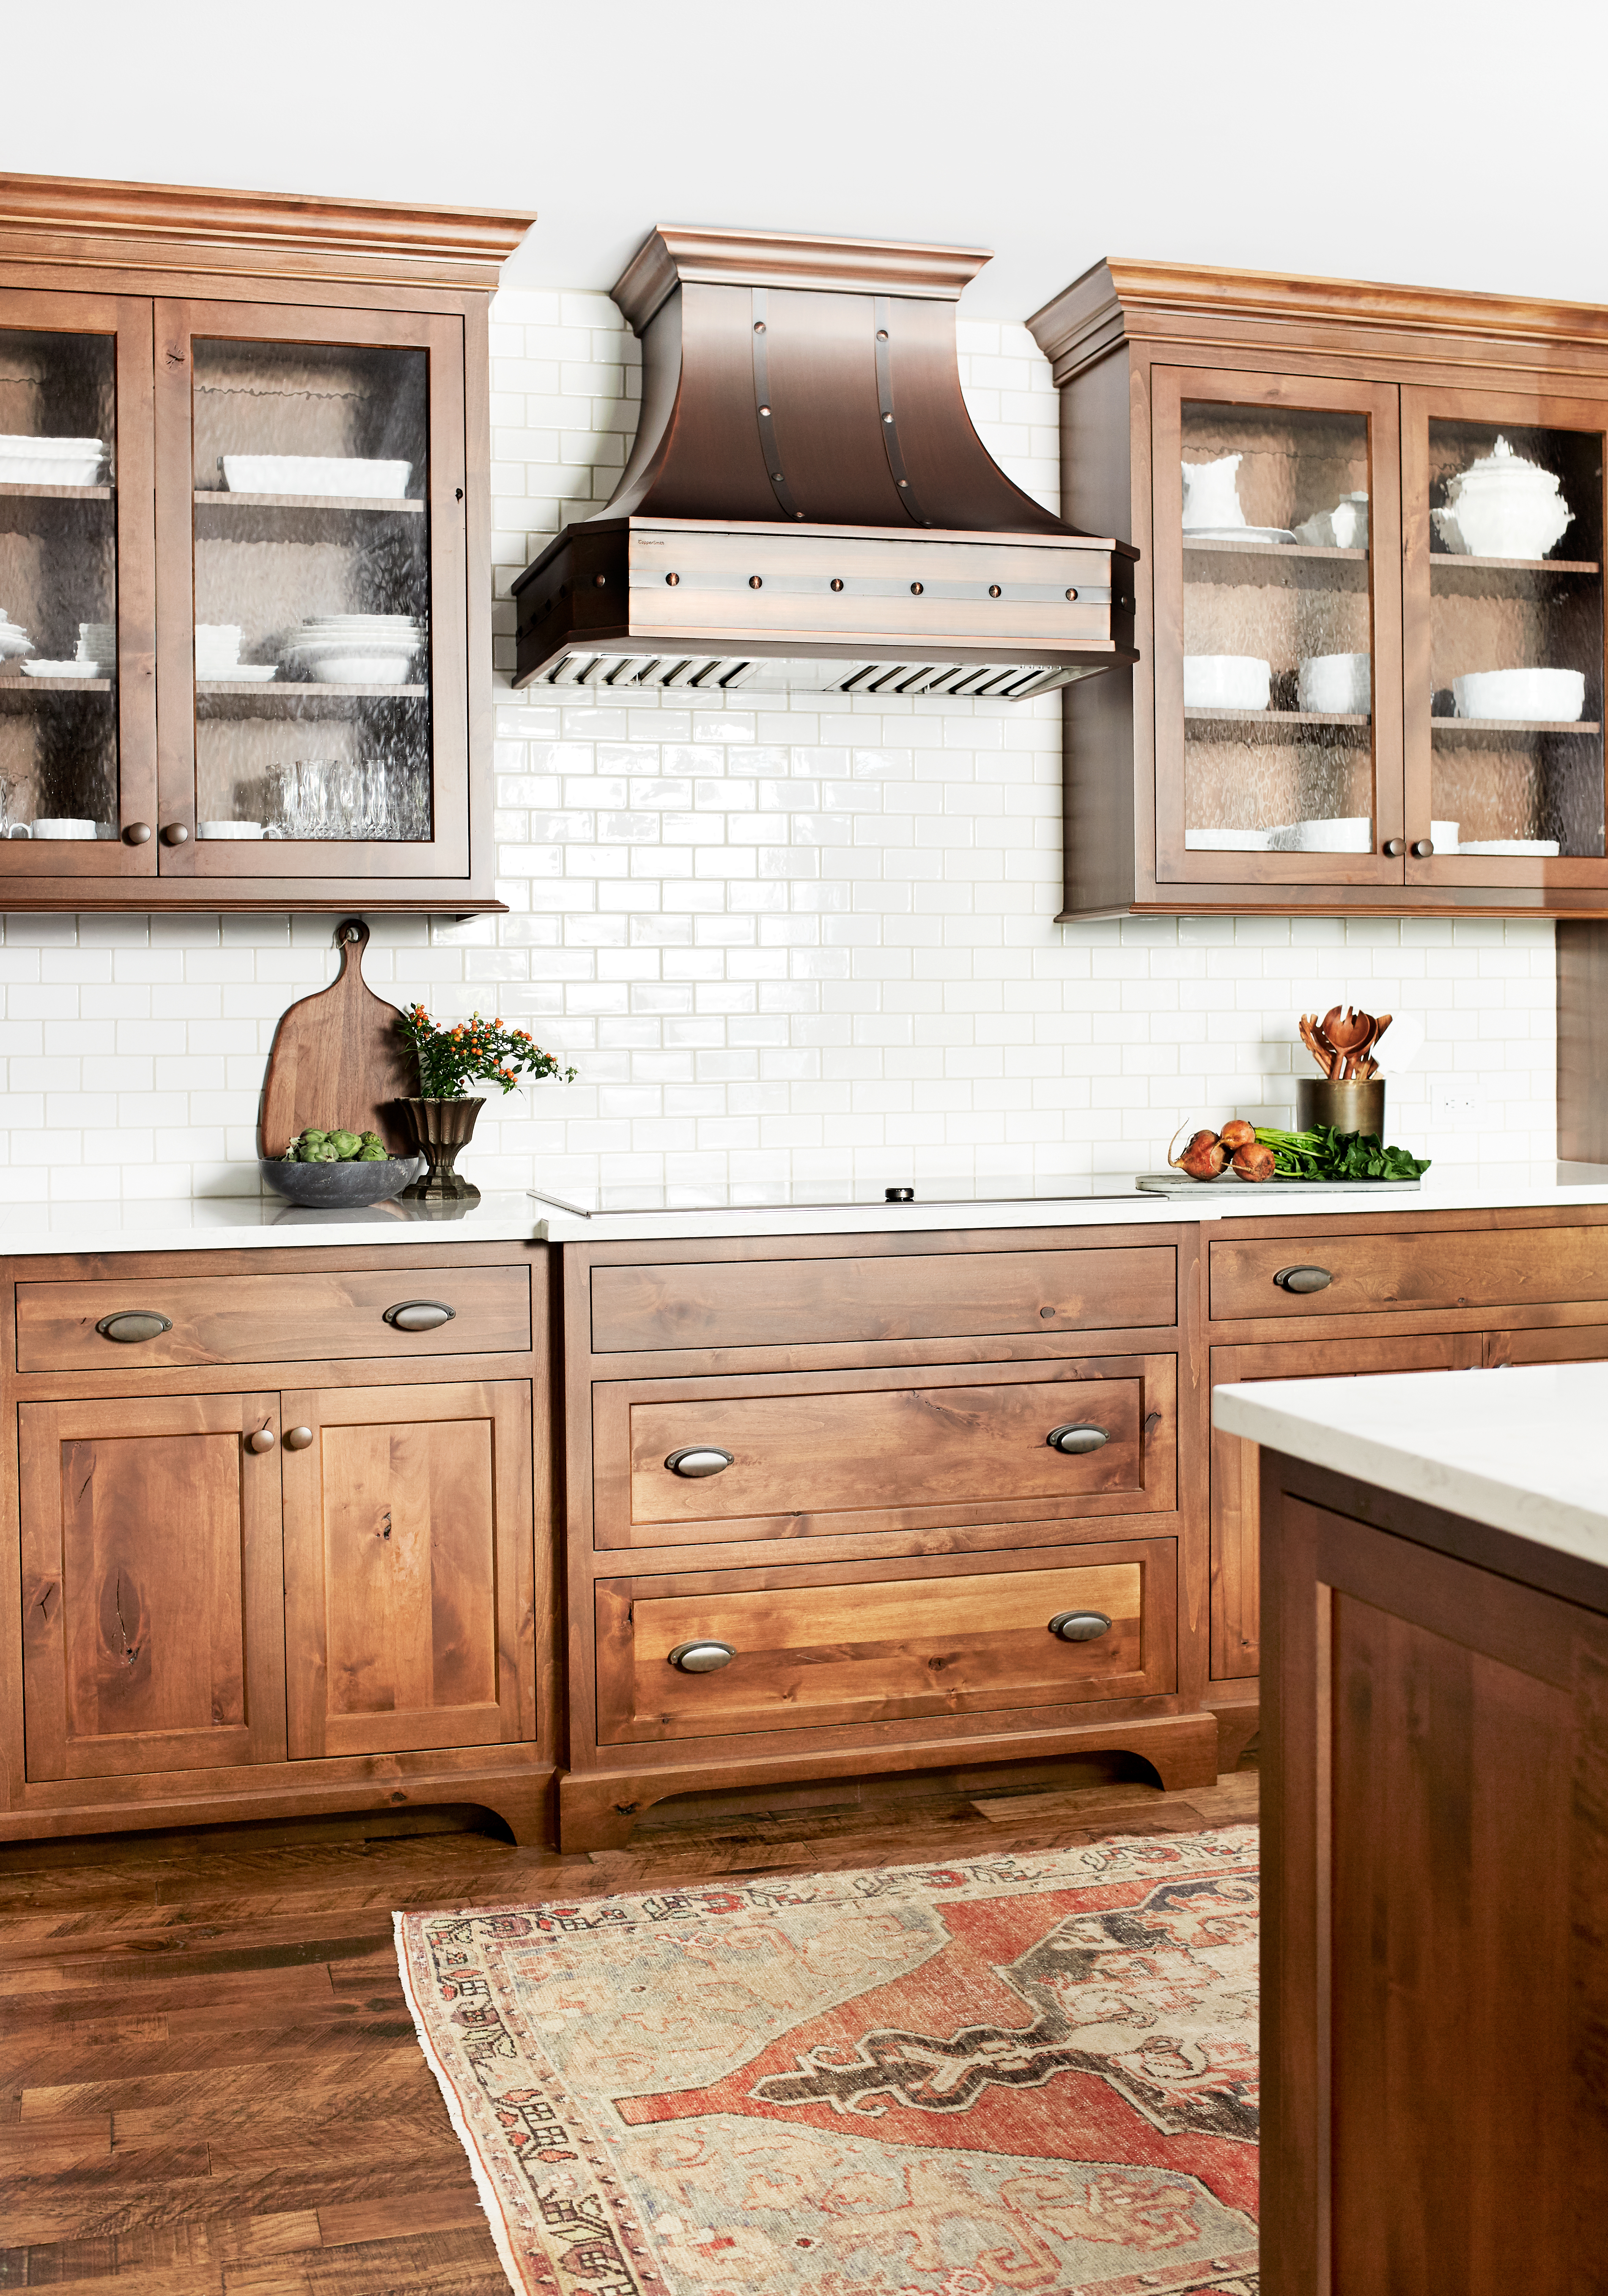 How to Remove Odor from Wood Cabinets: The Ultimate Guide